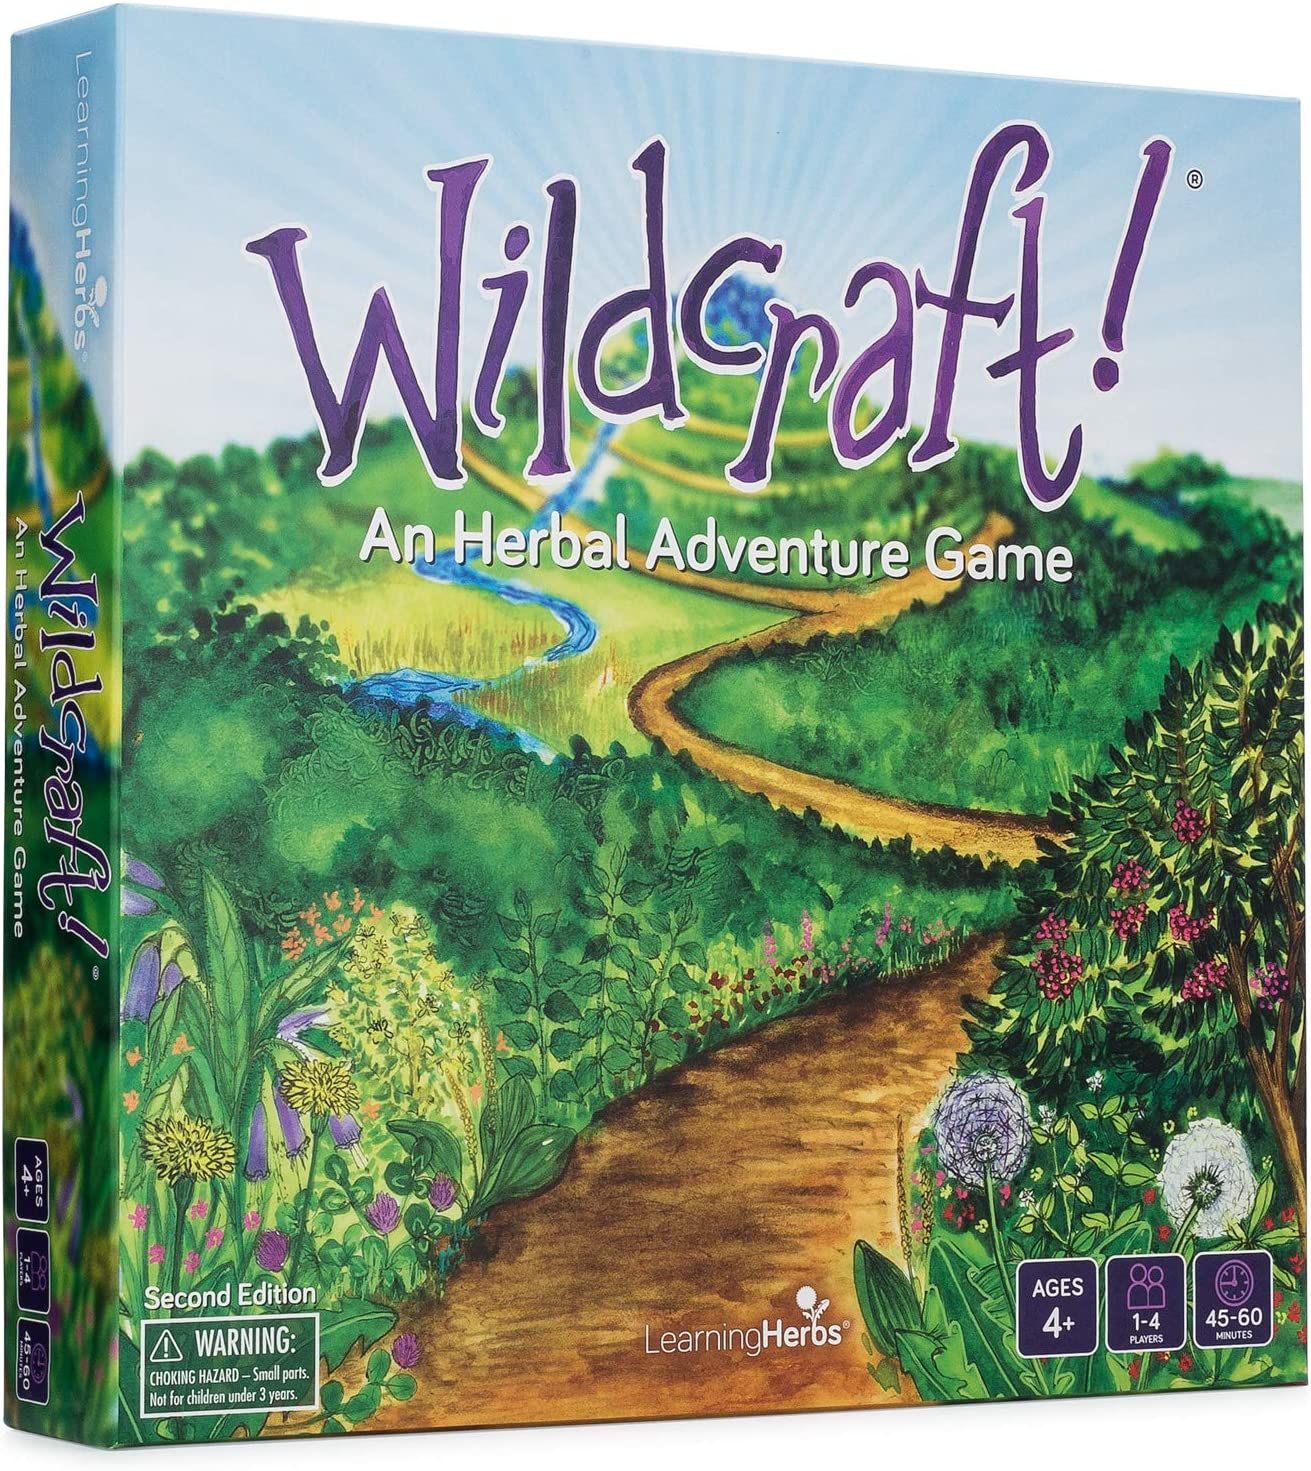 Wildcraft Herbal is one of the most beautiful board games for kids